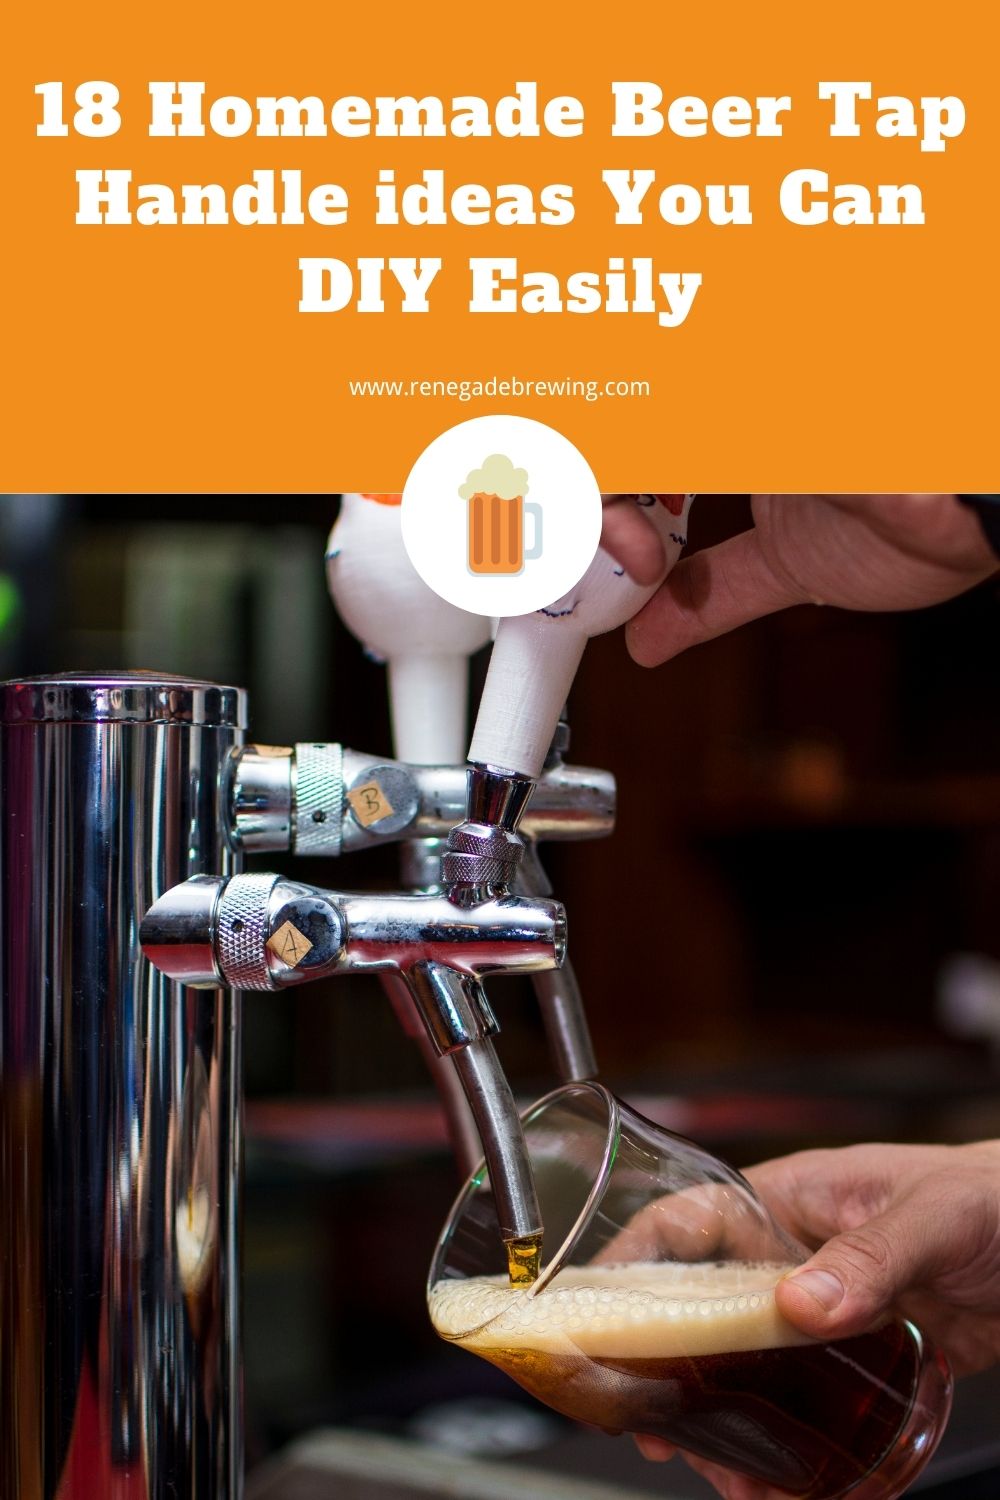 18 Homemade Beer Tap Handle ideas You Can DIY Easily 1